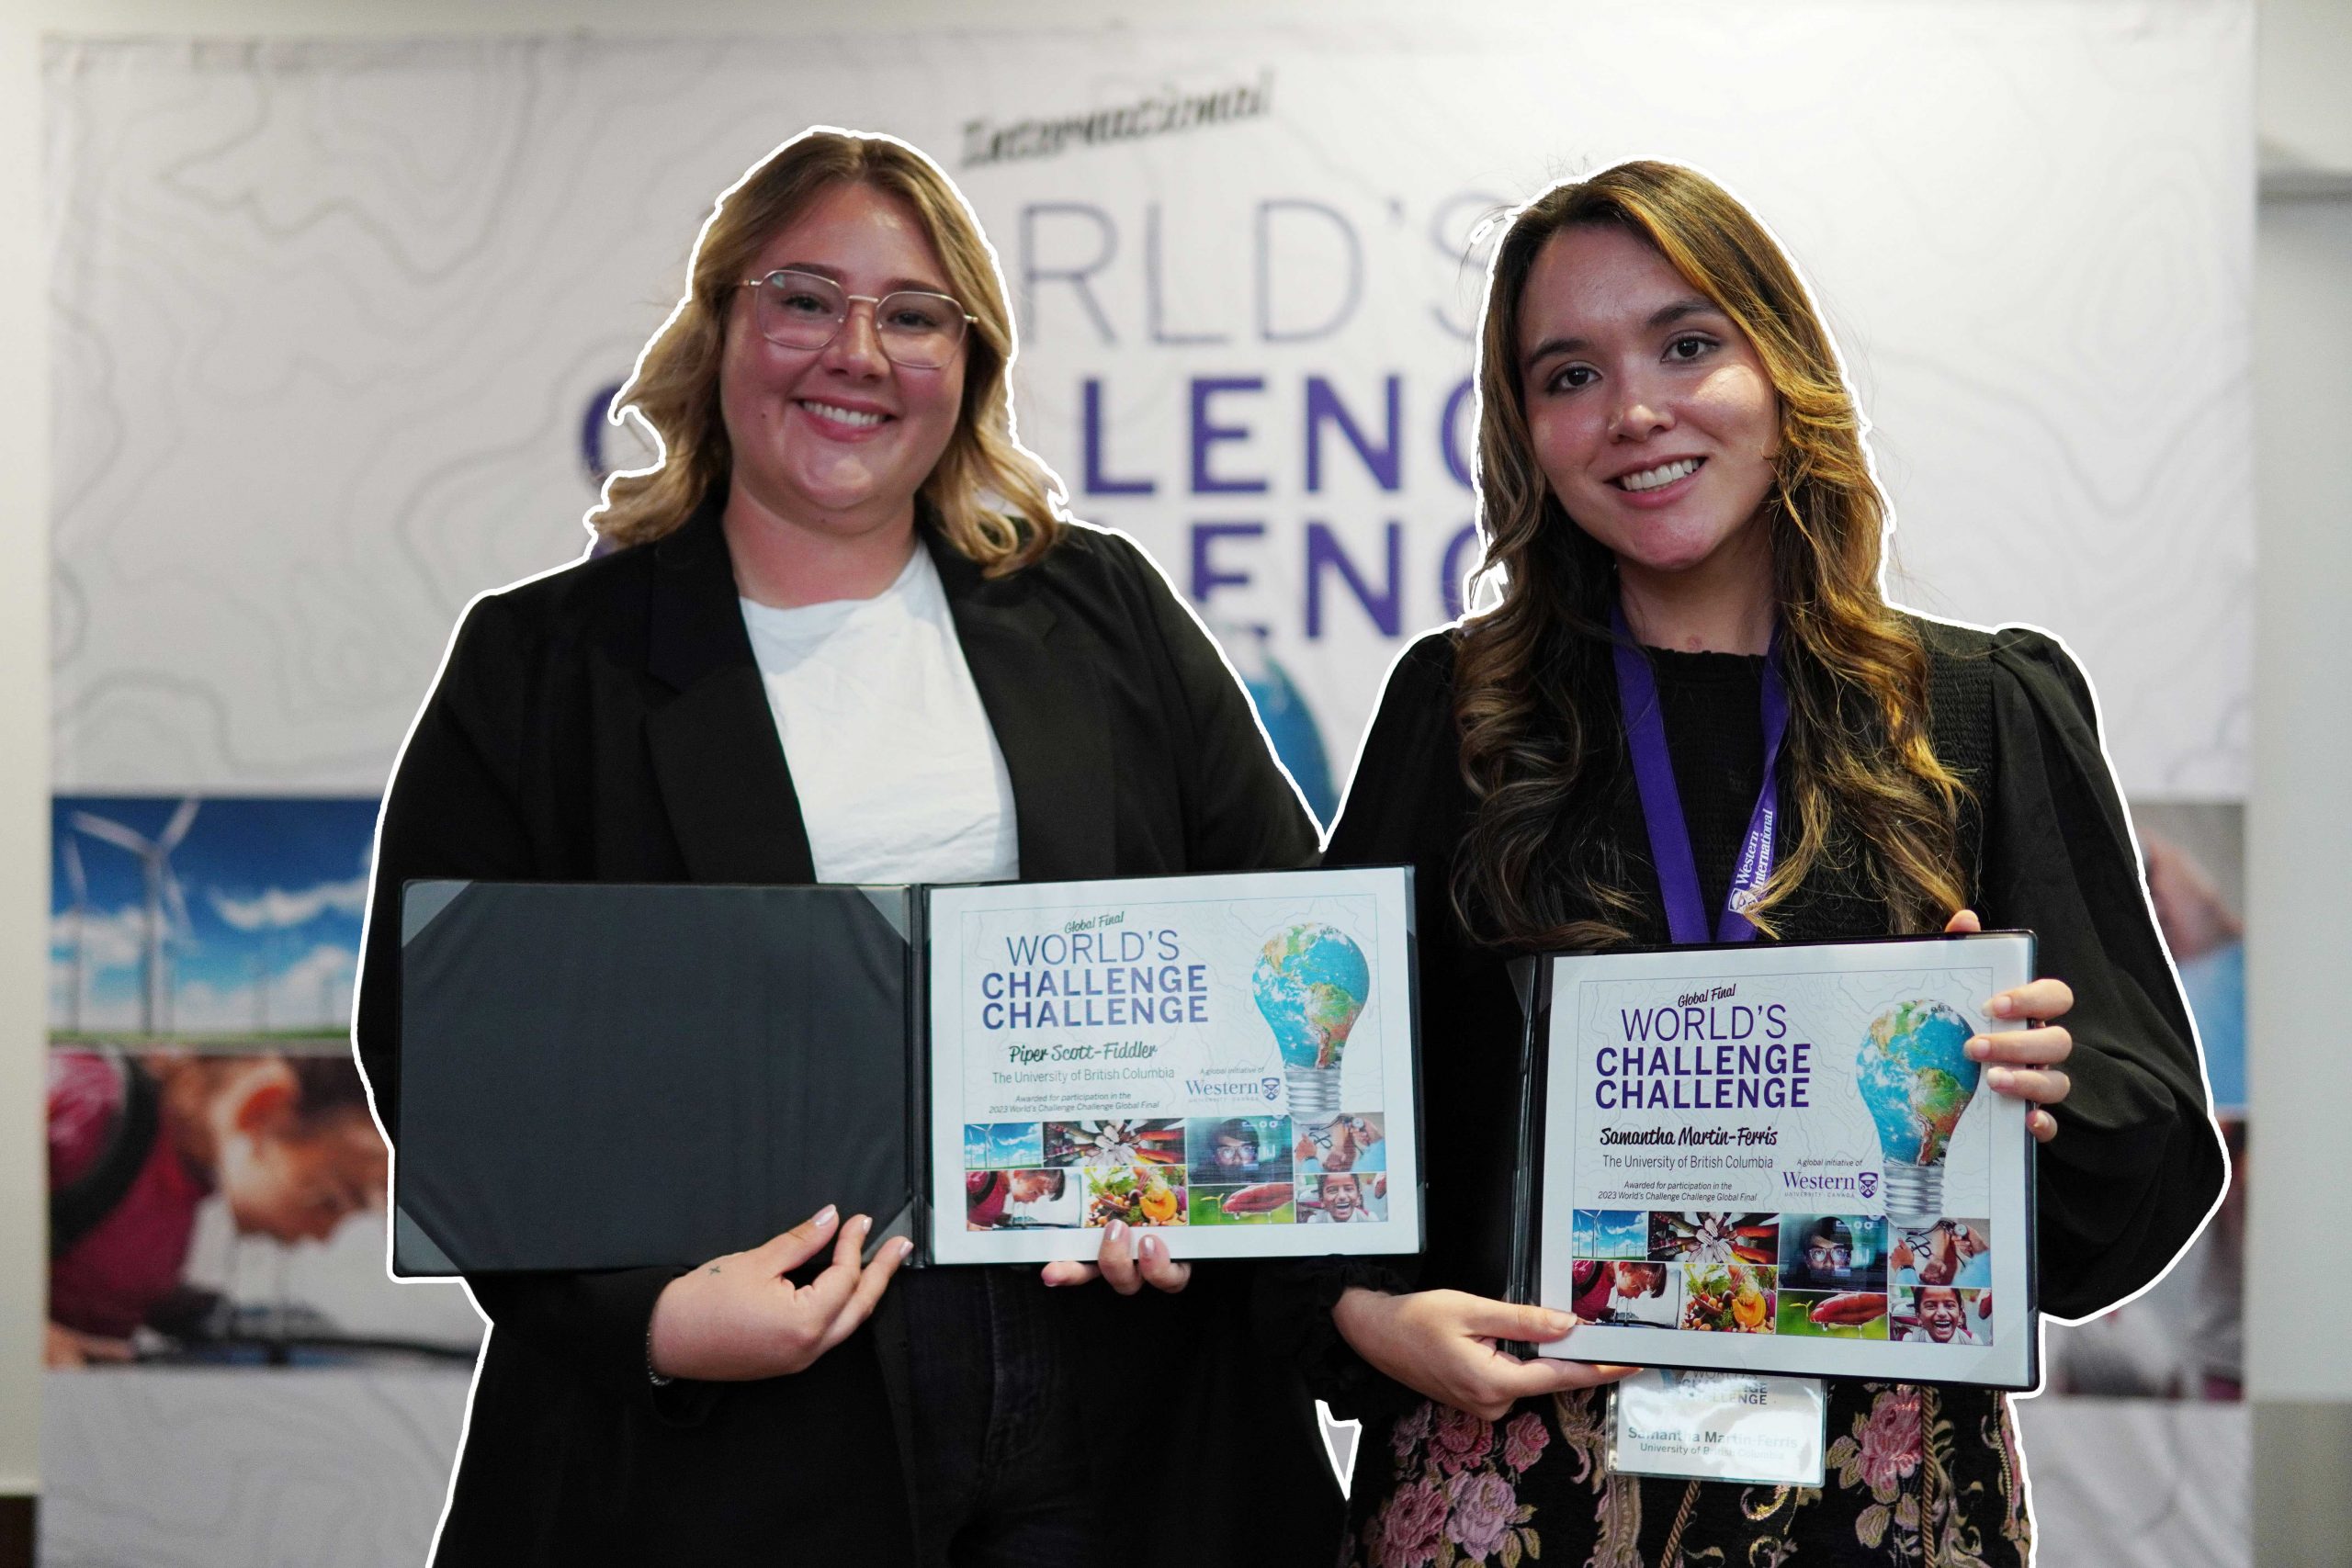 Piper Scott-Fiddler and Samantha Martin-Ferris holding their World's Challenge Challenge certificates. Photo courtesy of the University of Western Ontario.